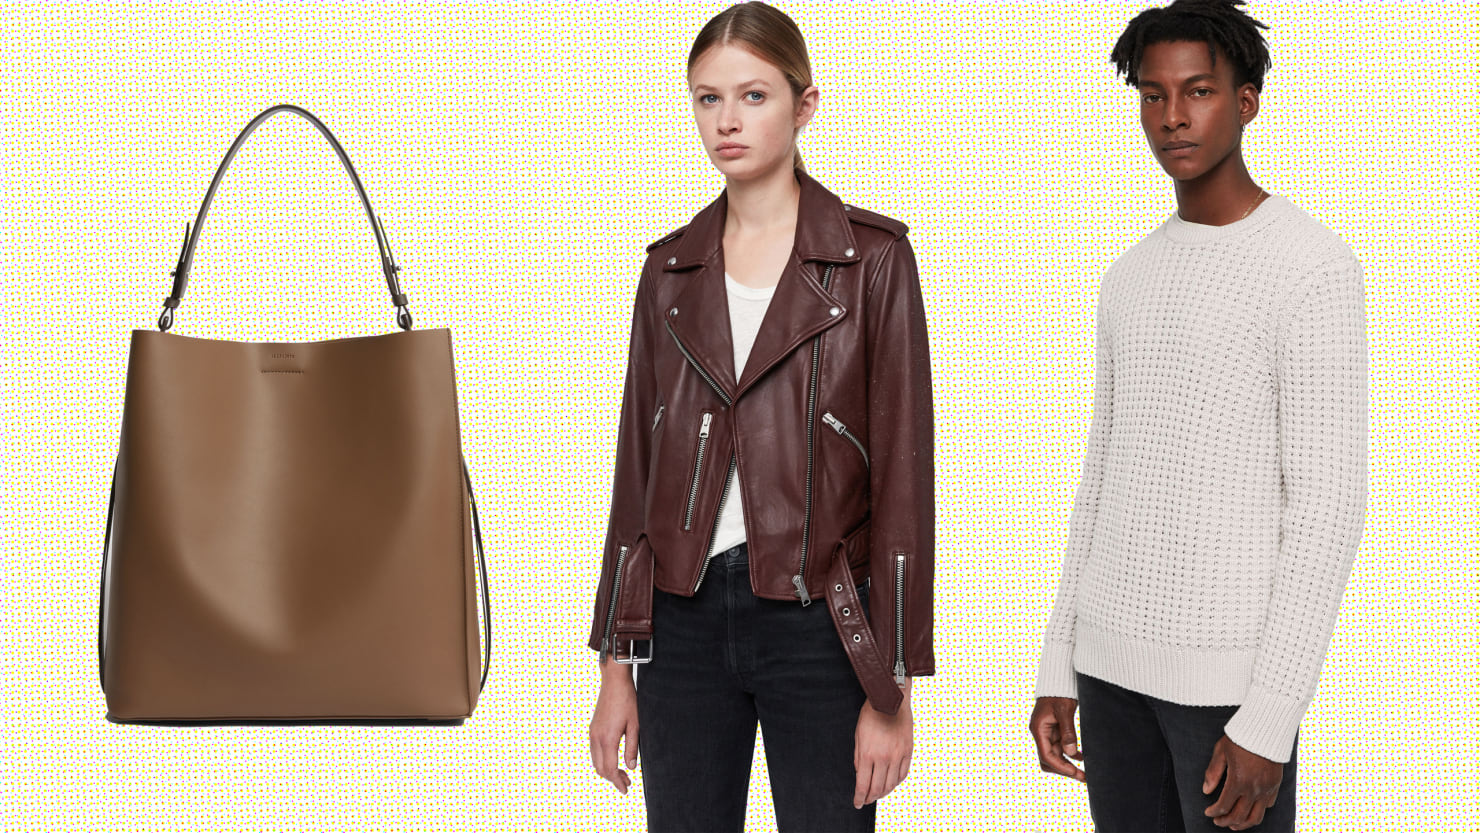 The AllSaints Sale Has Leather Jackets, Bags, and More